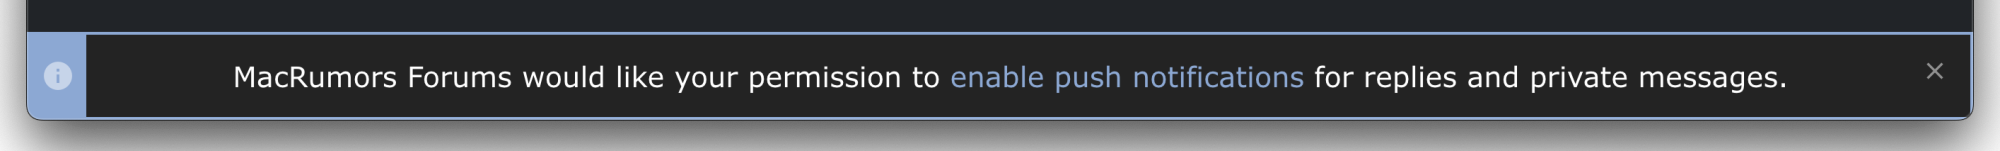 enable_push_notifications.png